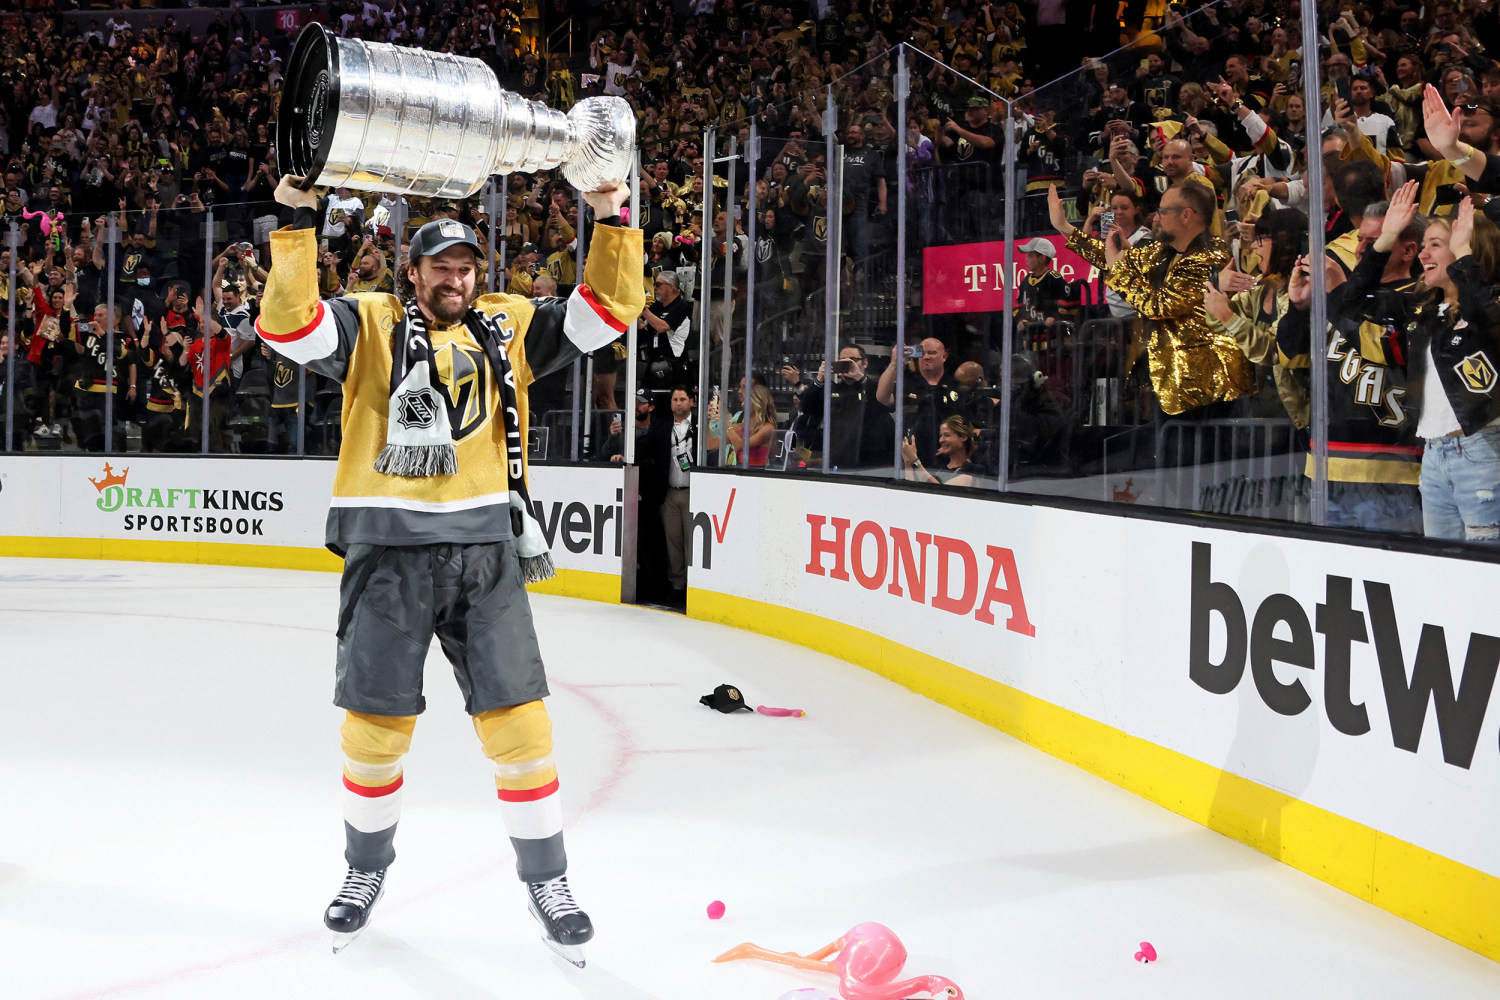 https://media-cldnry.s-nbcnews.com/image/upload/t_fit-1500w,f_auto,q_auto:best/rockcms/2023-06/230613-golden-knights-mark-stone-stanley-cup-ac-1159p-ff3c84.jpg